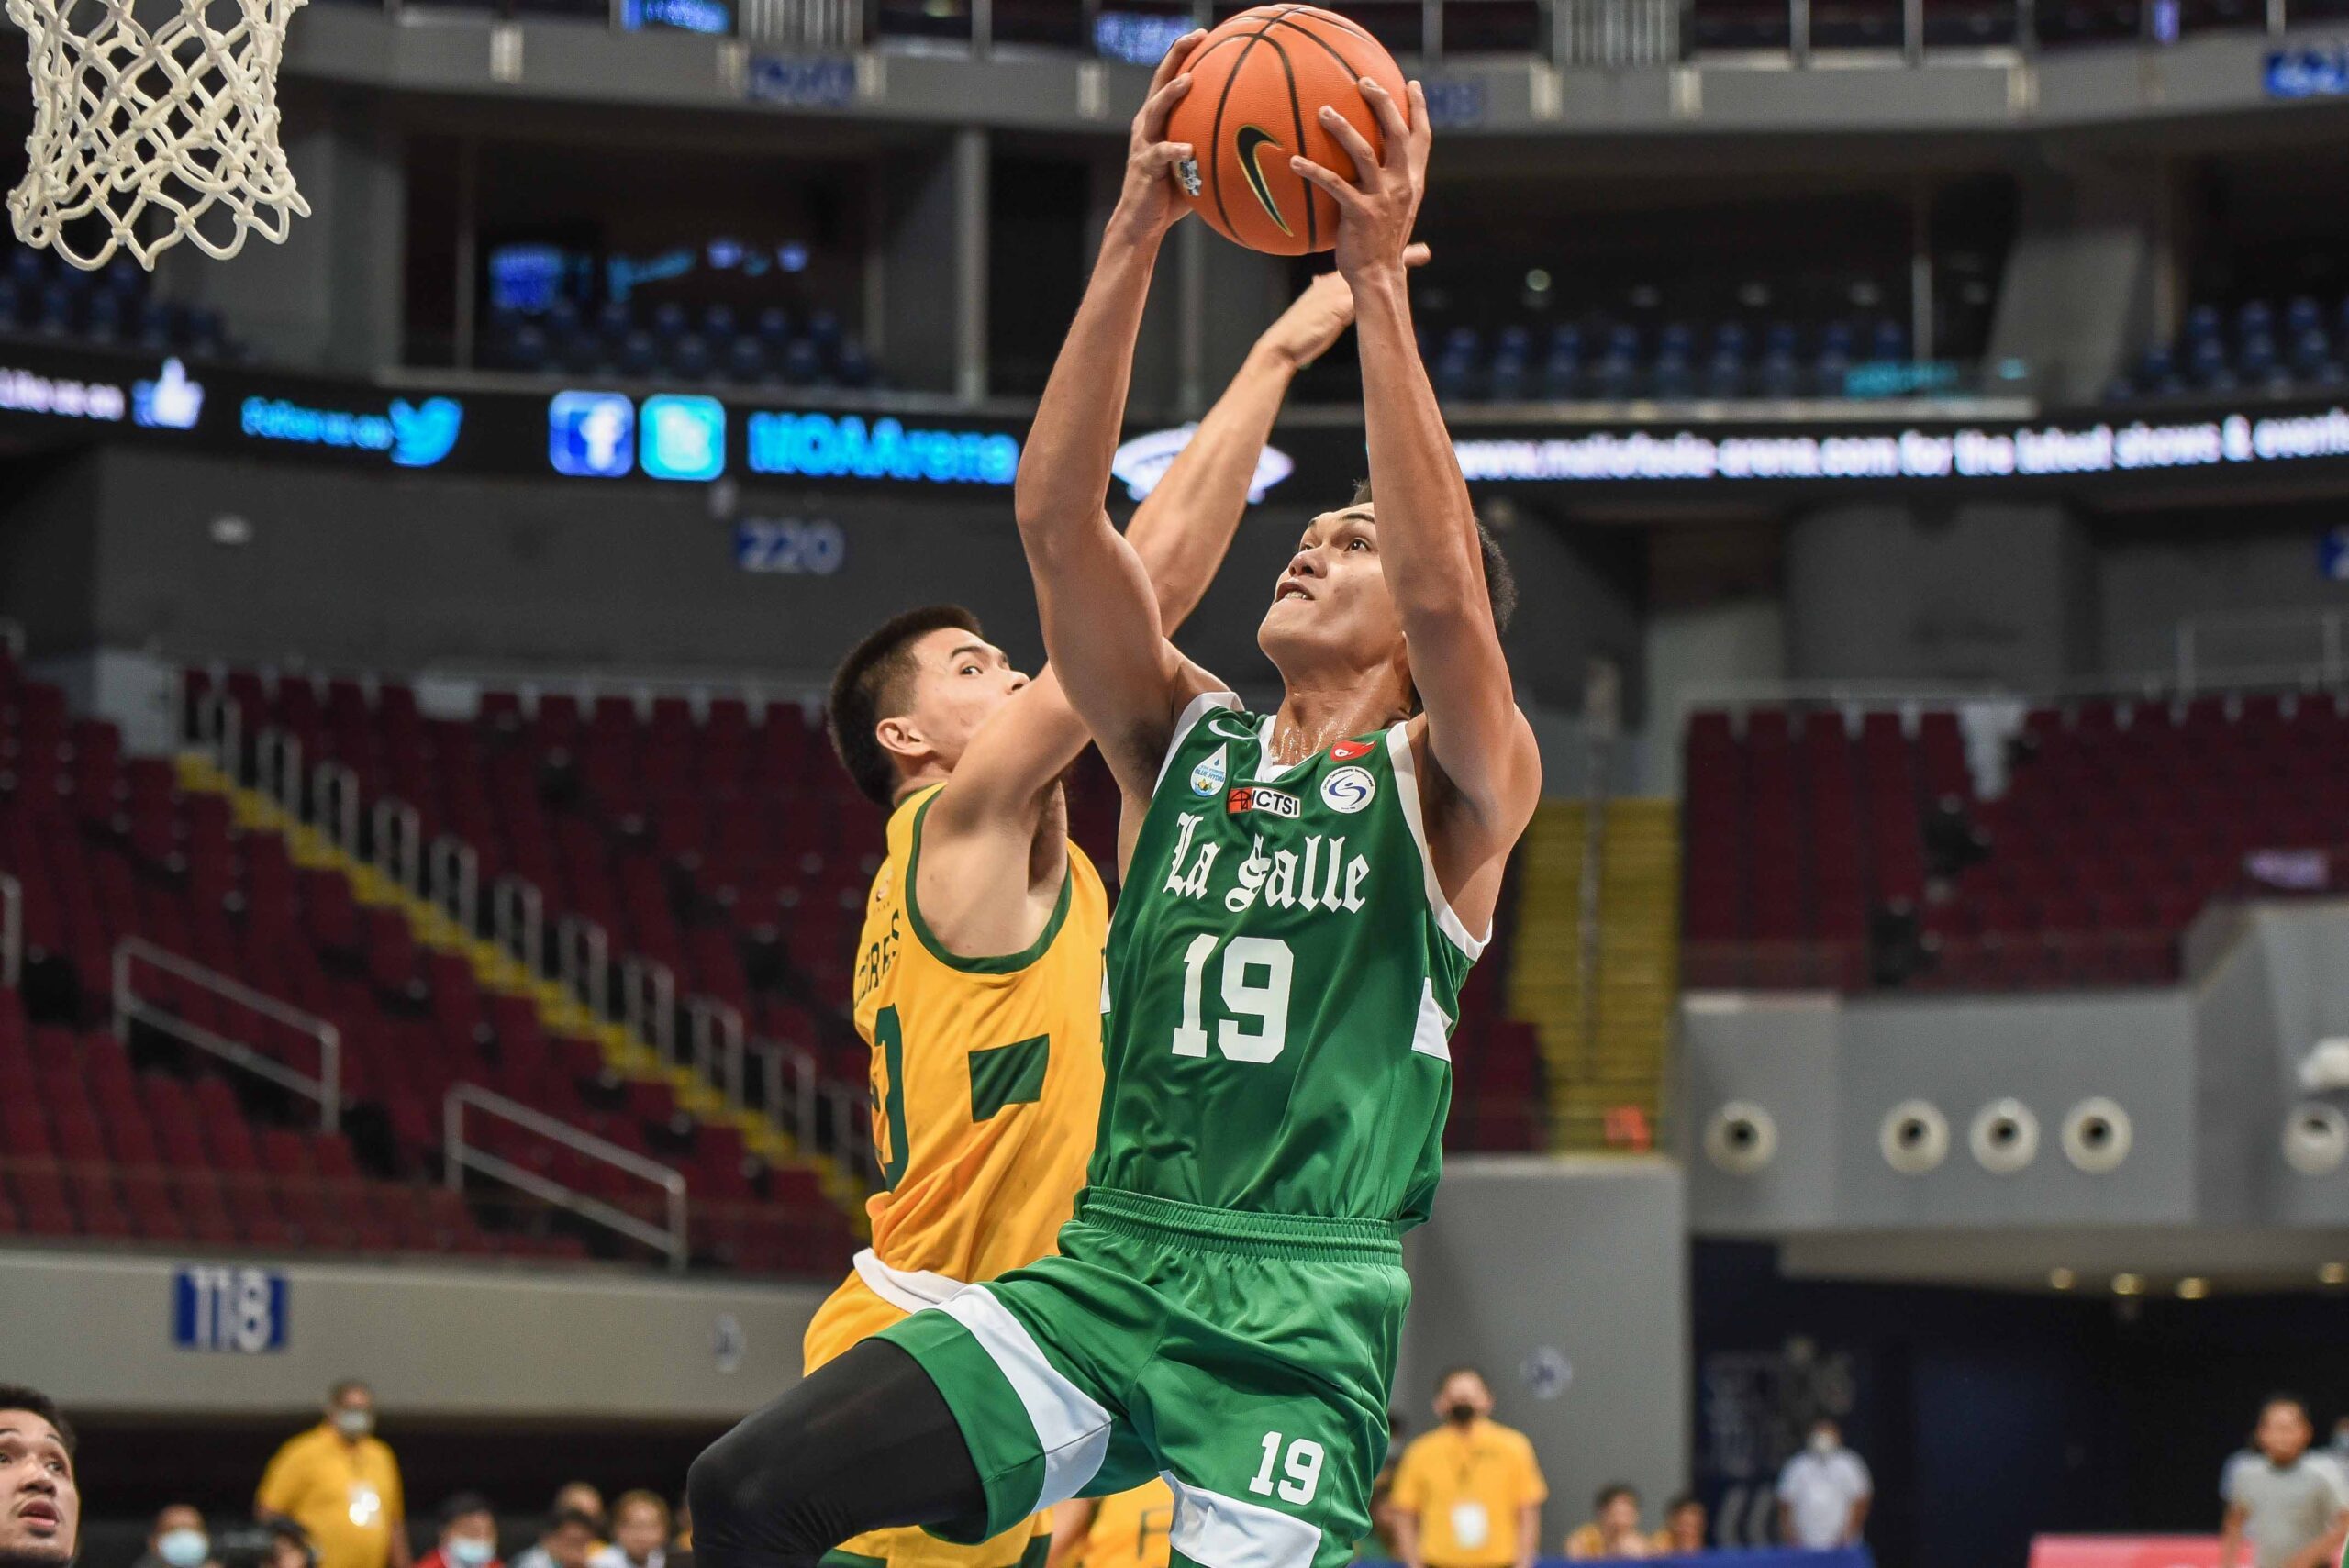 Baltazar dominates as La Salle outlasts FEU for 3rd straight win